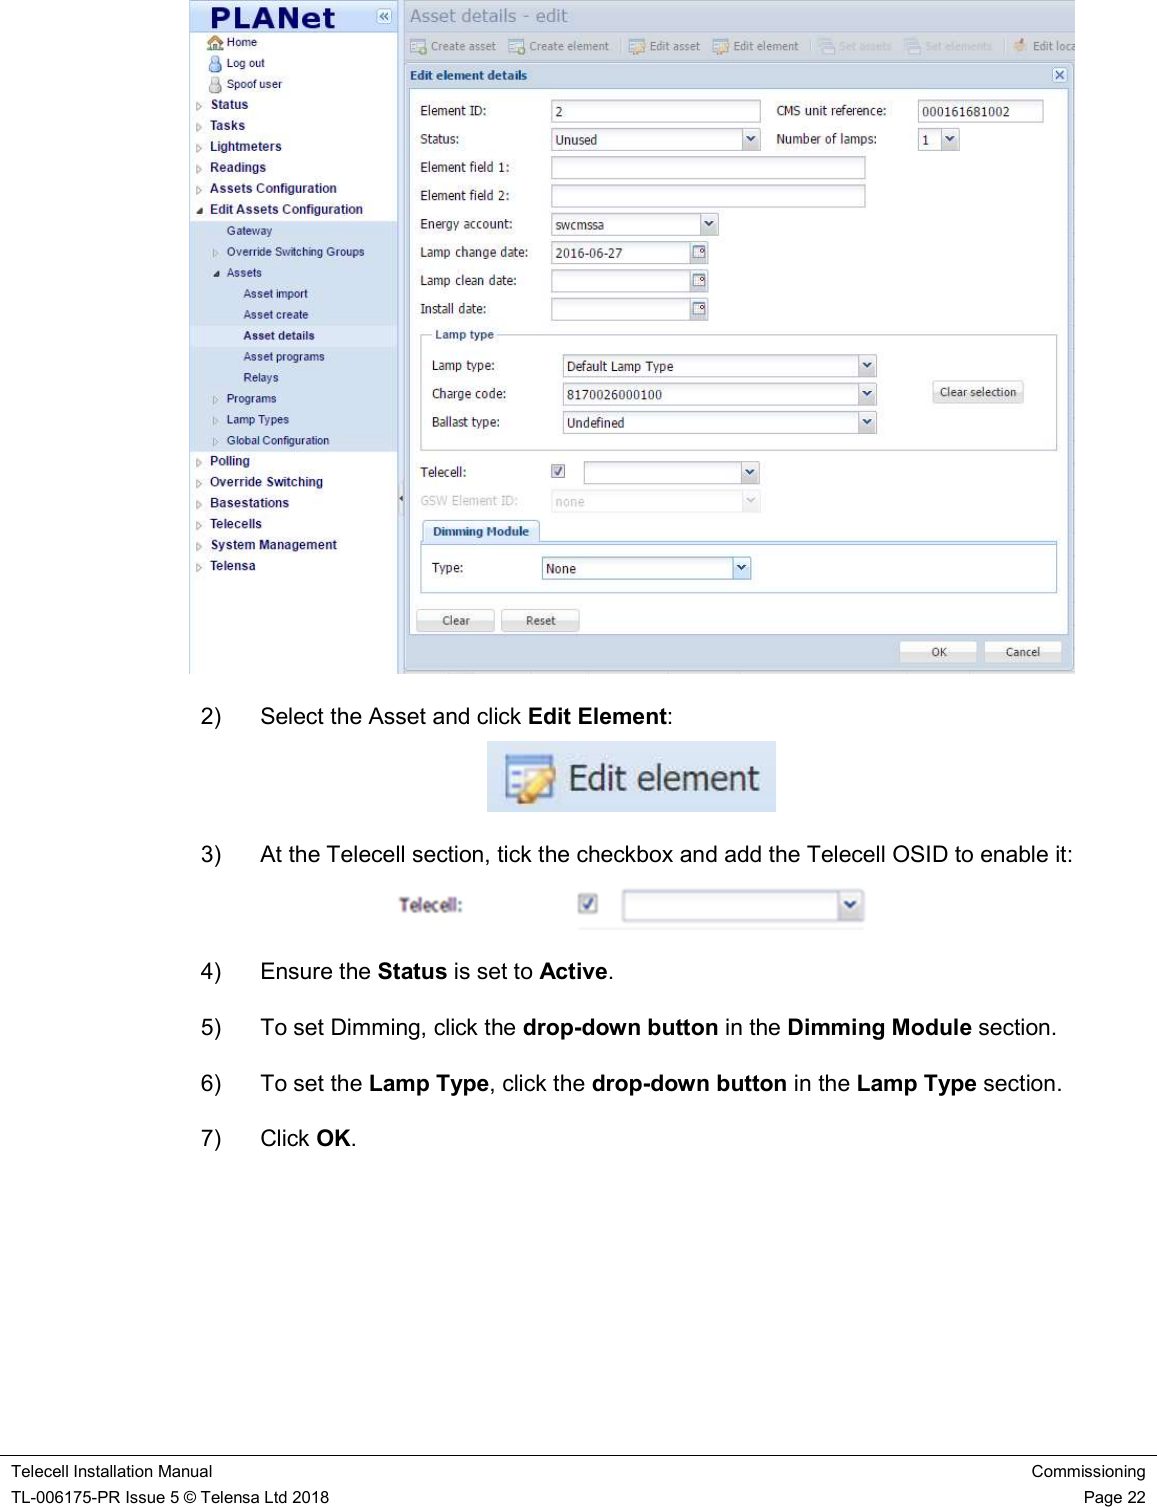    Telecell Installation Manual Commissioning TL-006175-PR Issue 5 © Telensa Ltd 2018    Page 22   2)  Select the Asset and click Edit Element:  3)  At the Telecell section, tick the checkbox and add the Telecell OSID to enable it:  4)  Ensure the Status is set to Active. 5)  To set Dimming, click the drop-down button in the Dimming Module section. 6)  To set the Lamp Type, click the drop-down button in the Lamp Type section. 7)  Click OK.   